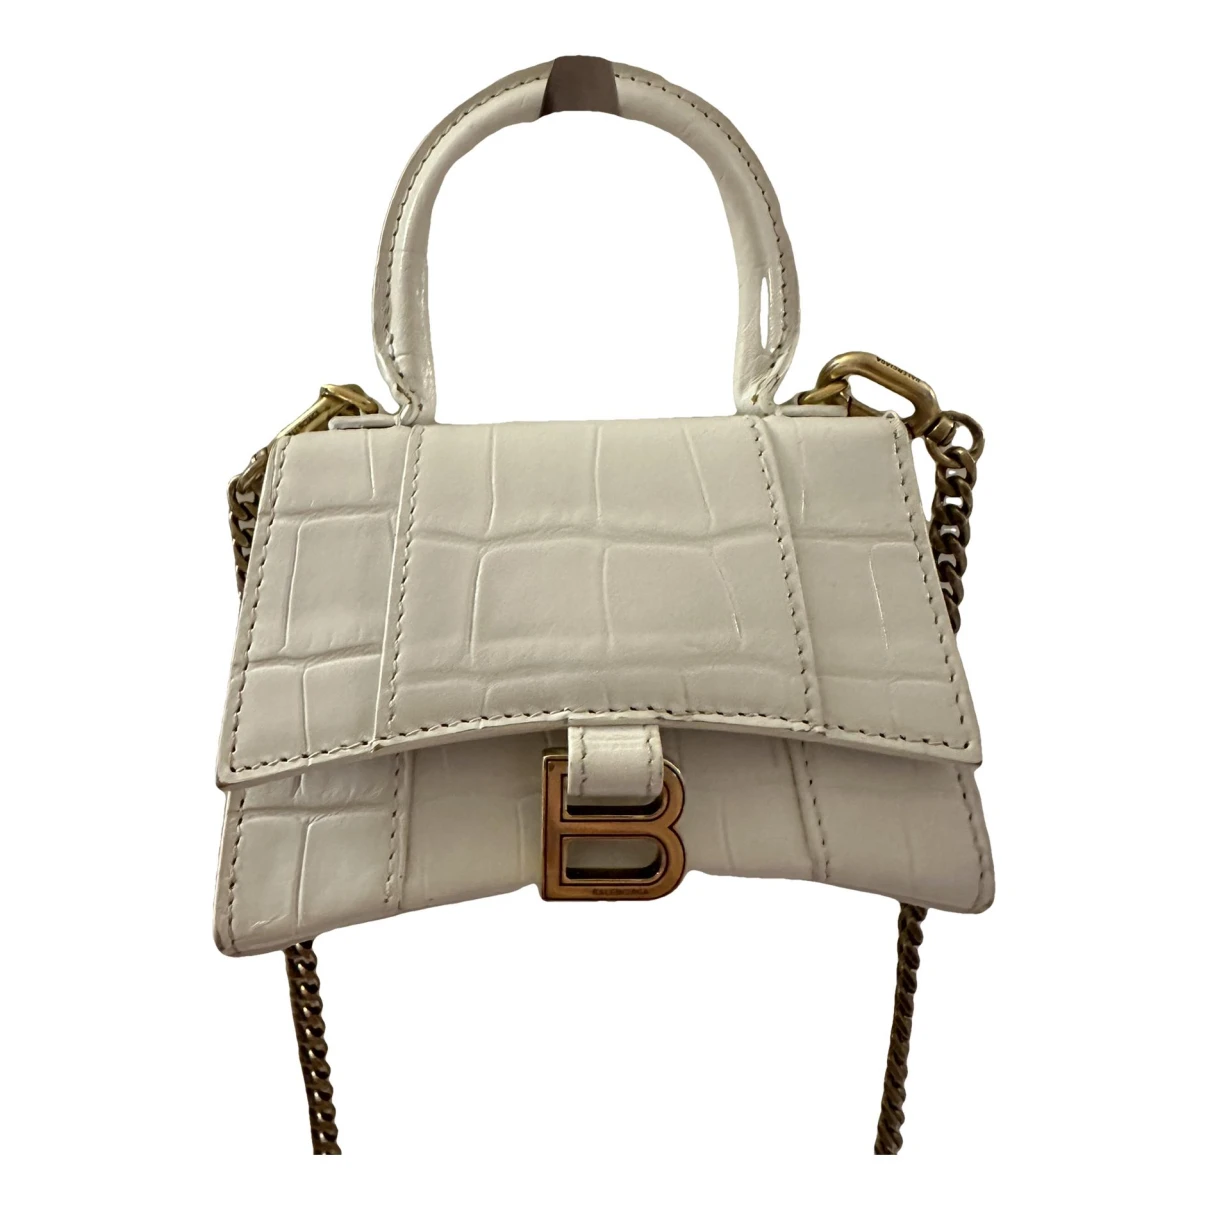 Pre-owned Balenciaga Hourglass Leather Crossbody Bag In White